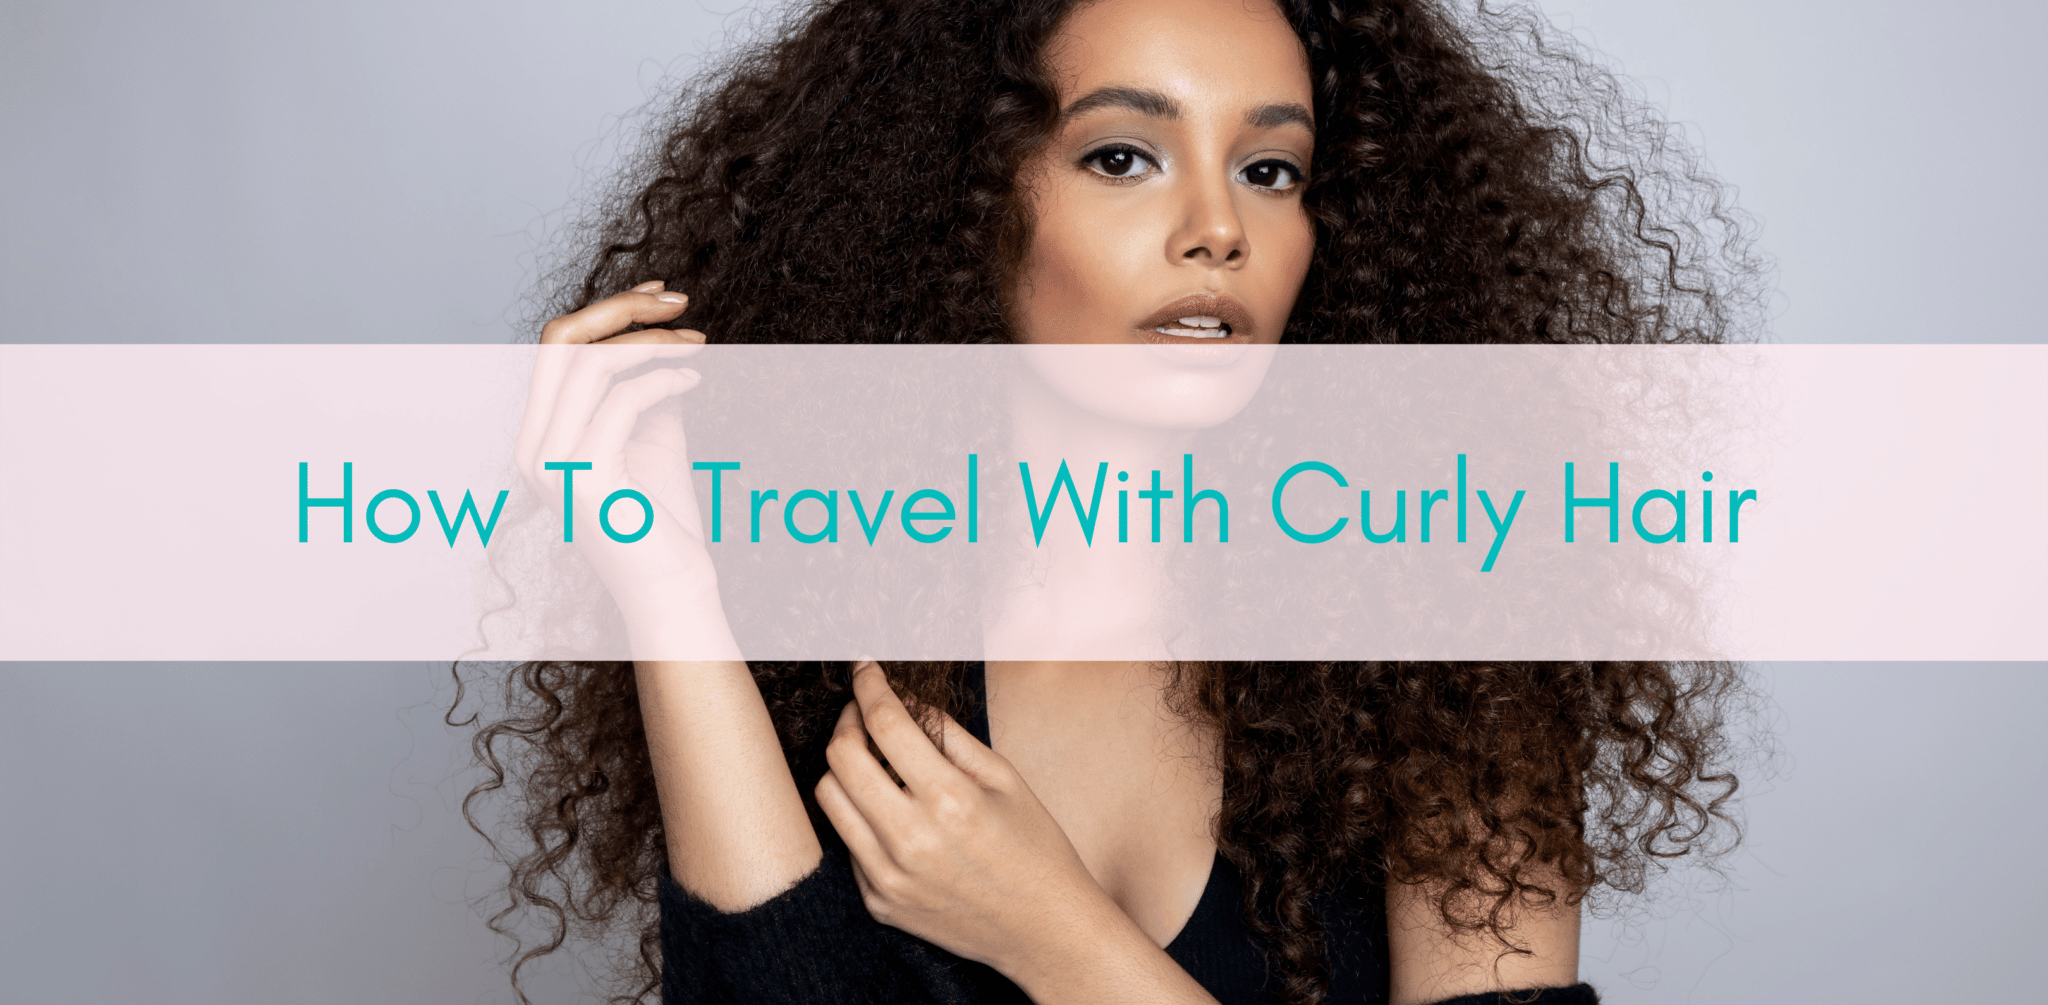 Girls Who Travel | How To Travel With Curly Hair